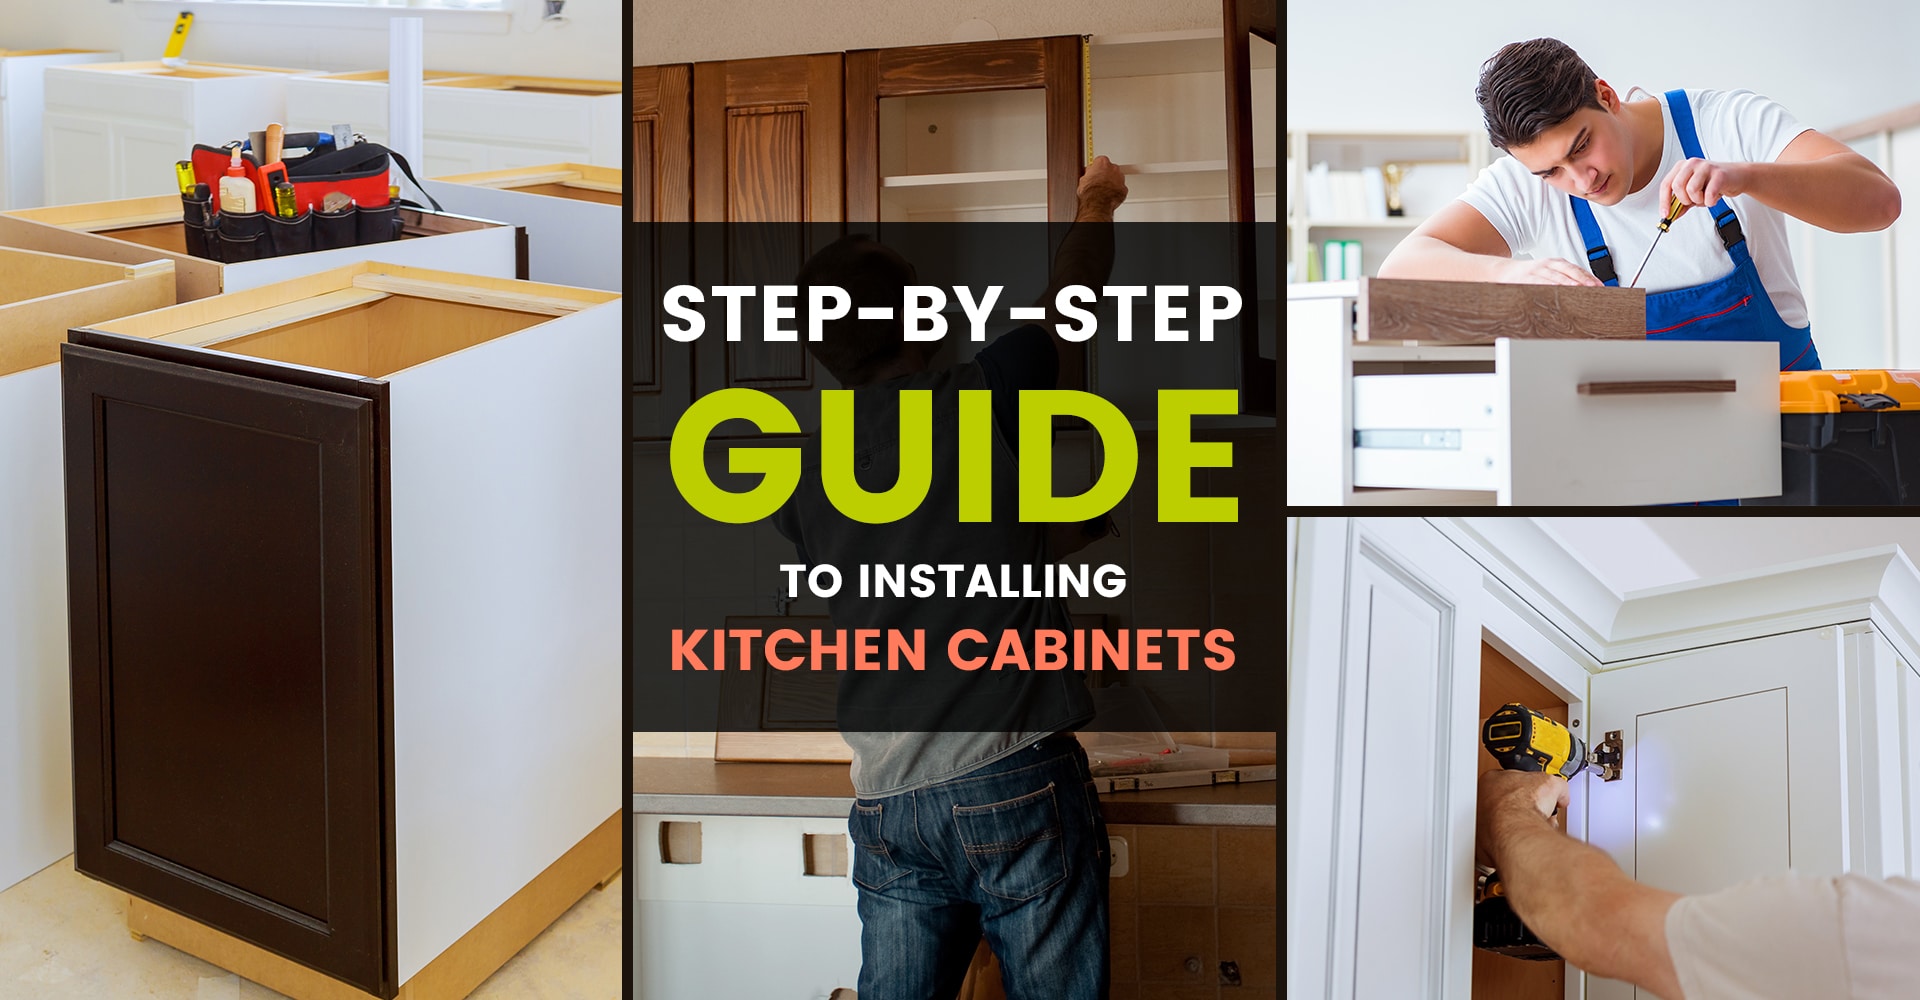 Accessorize Your Cabinets! Fix Those Under the Sink Storage Problems!